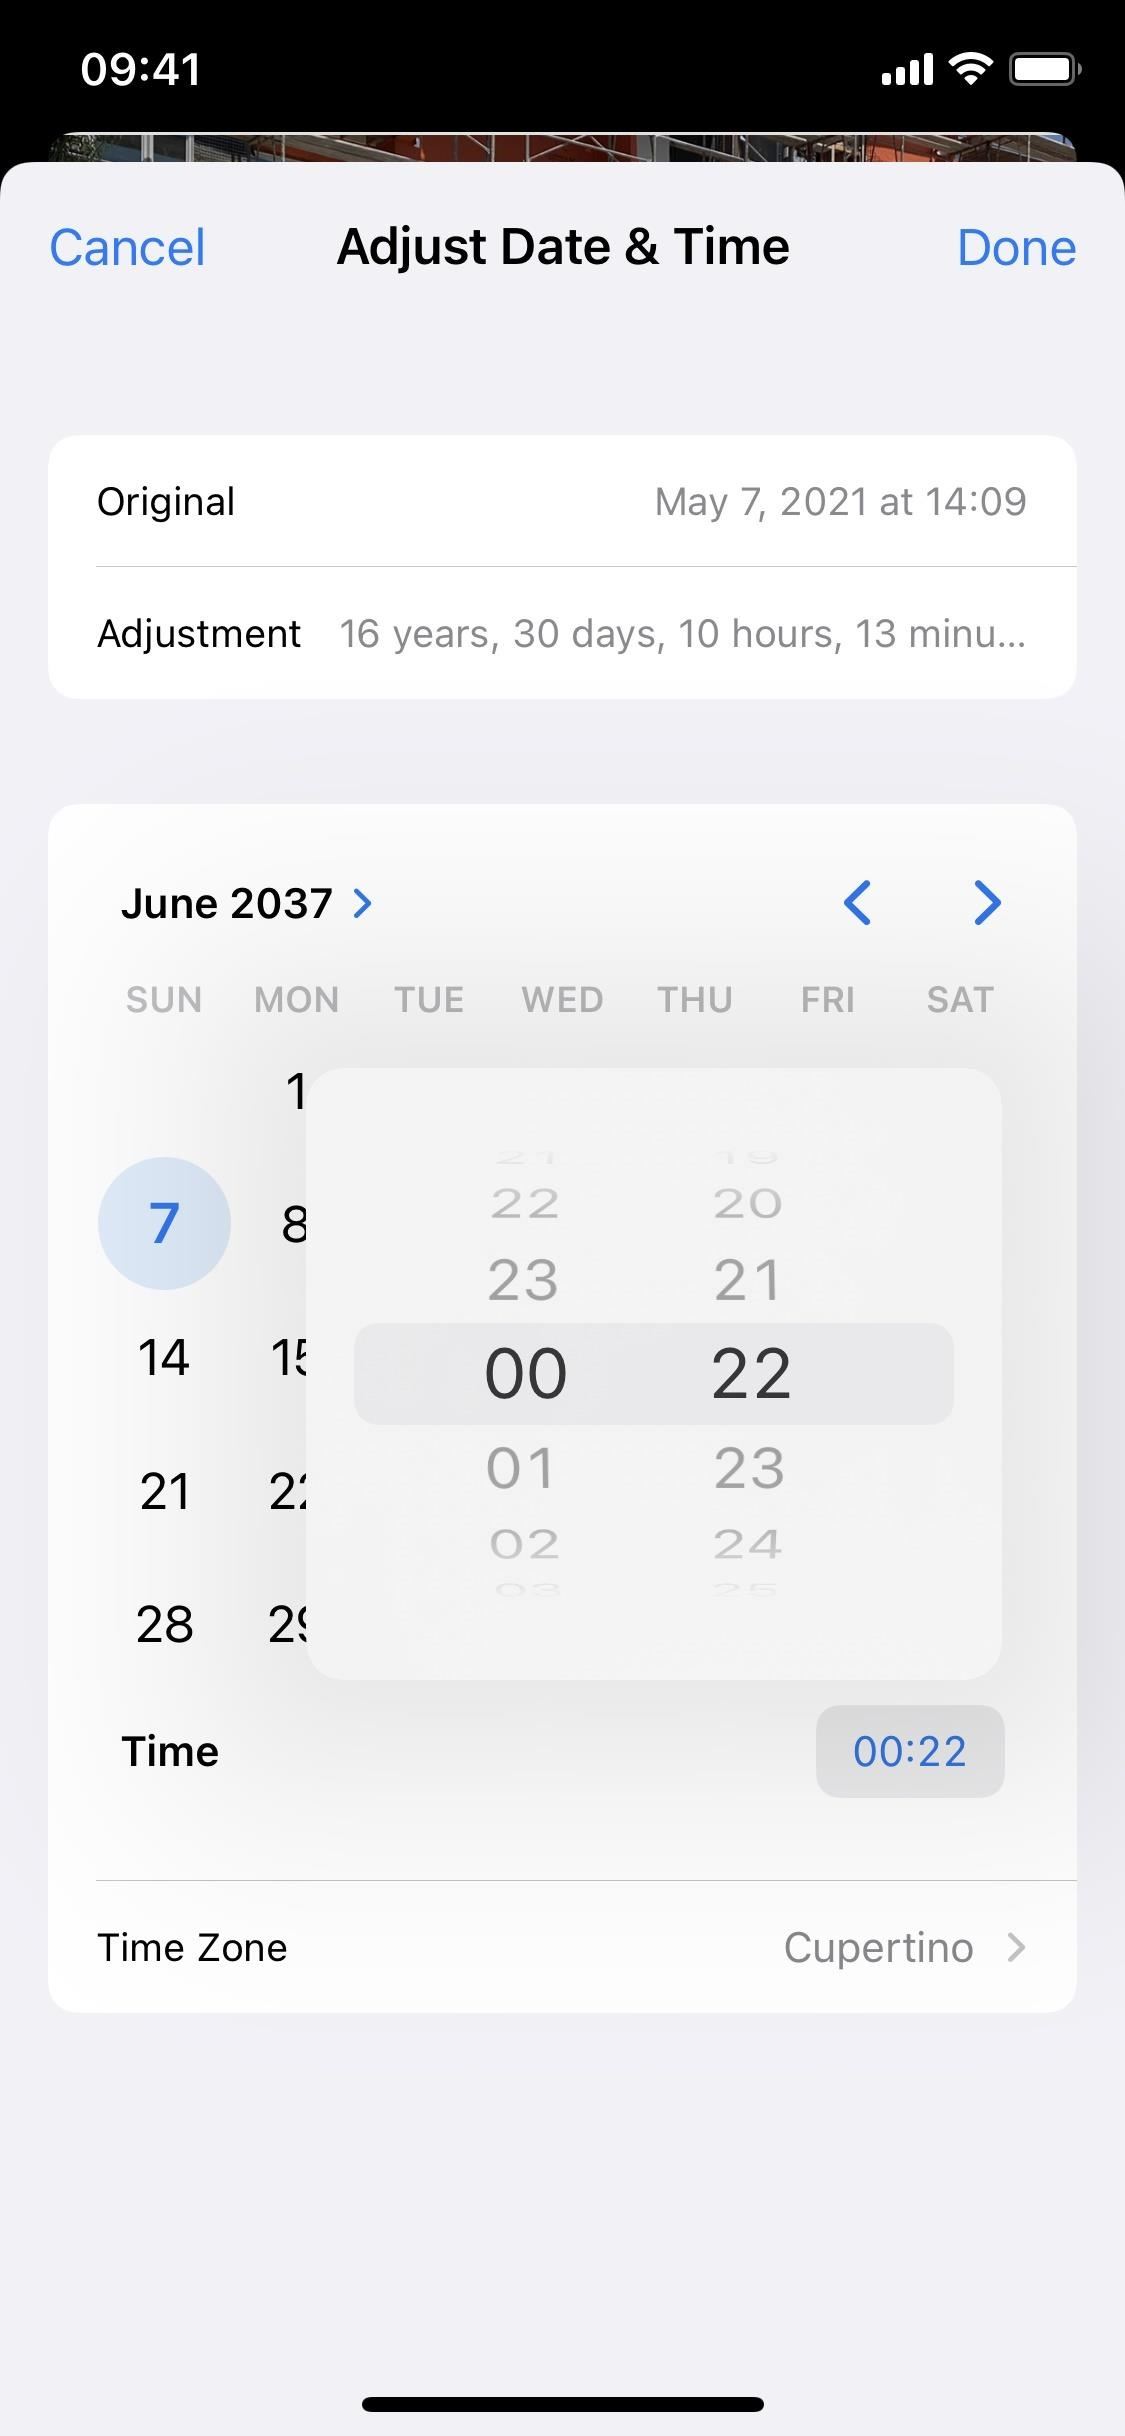 iOS 15 Makes It Really Easy to Change the Location & Date/Time for Any Photo or Video